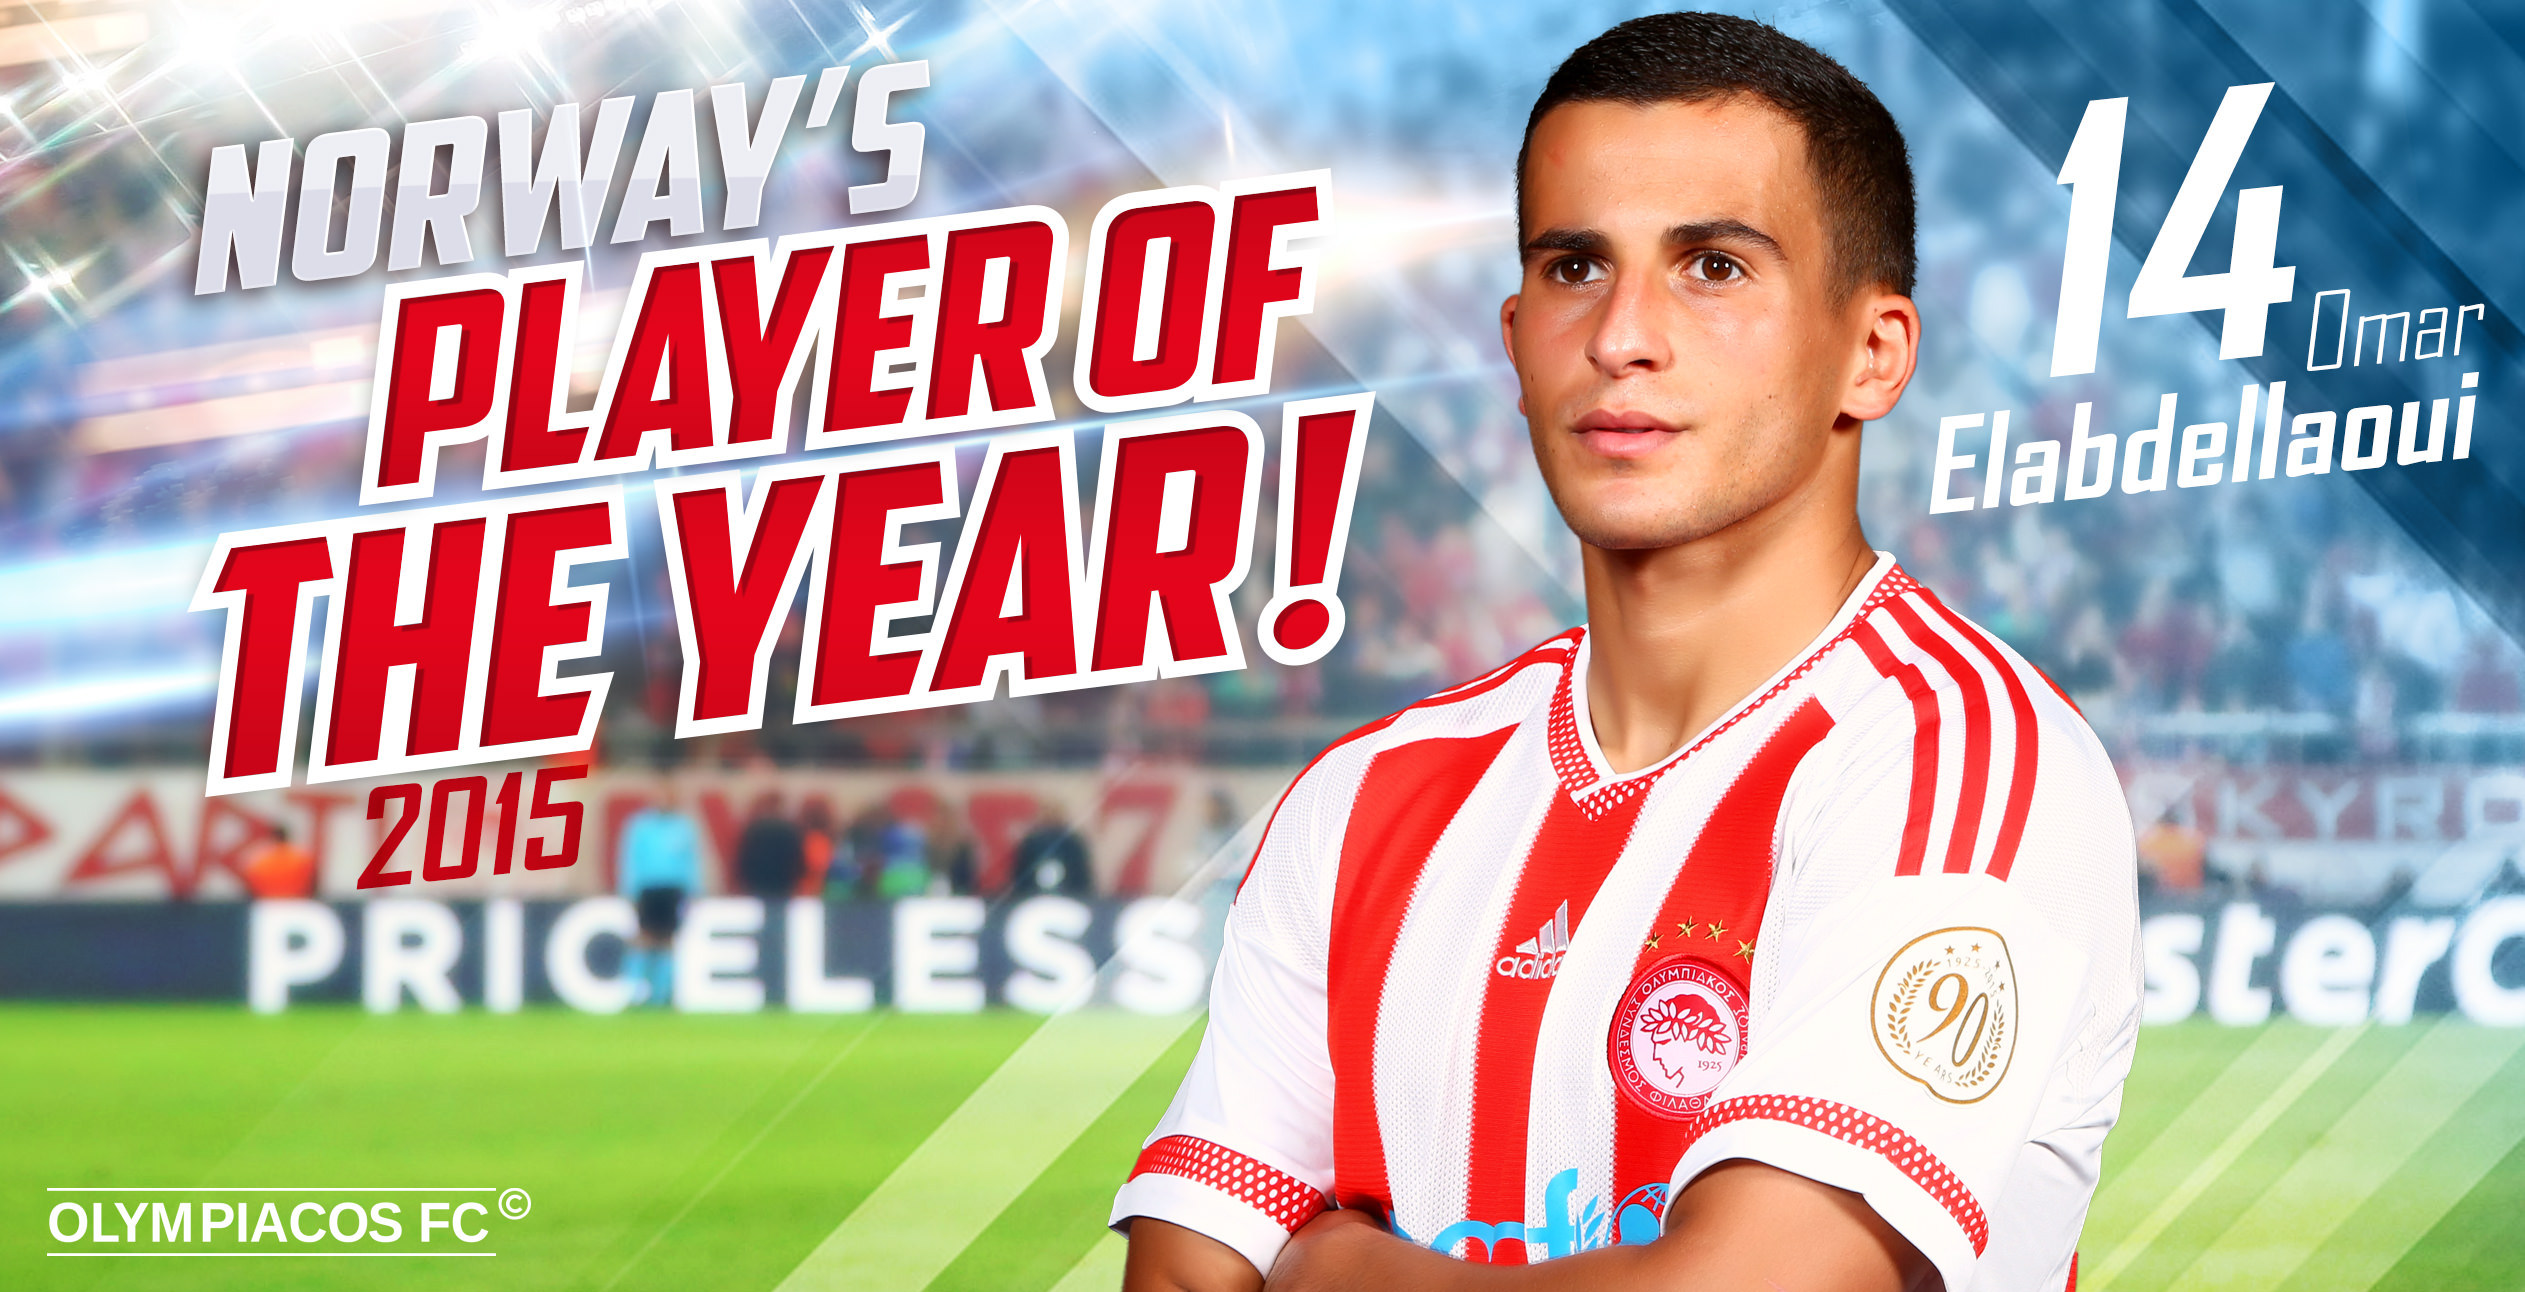 Elabdellaoui is Norway’s player of the year!